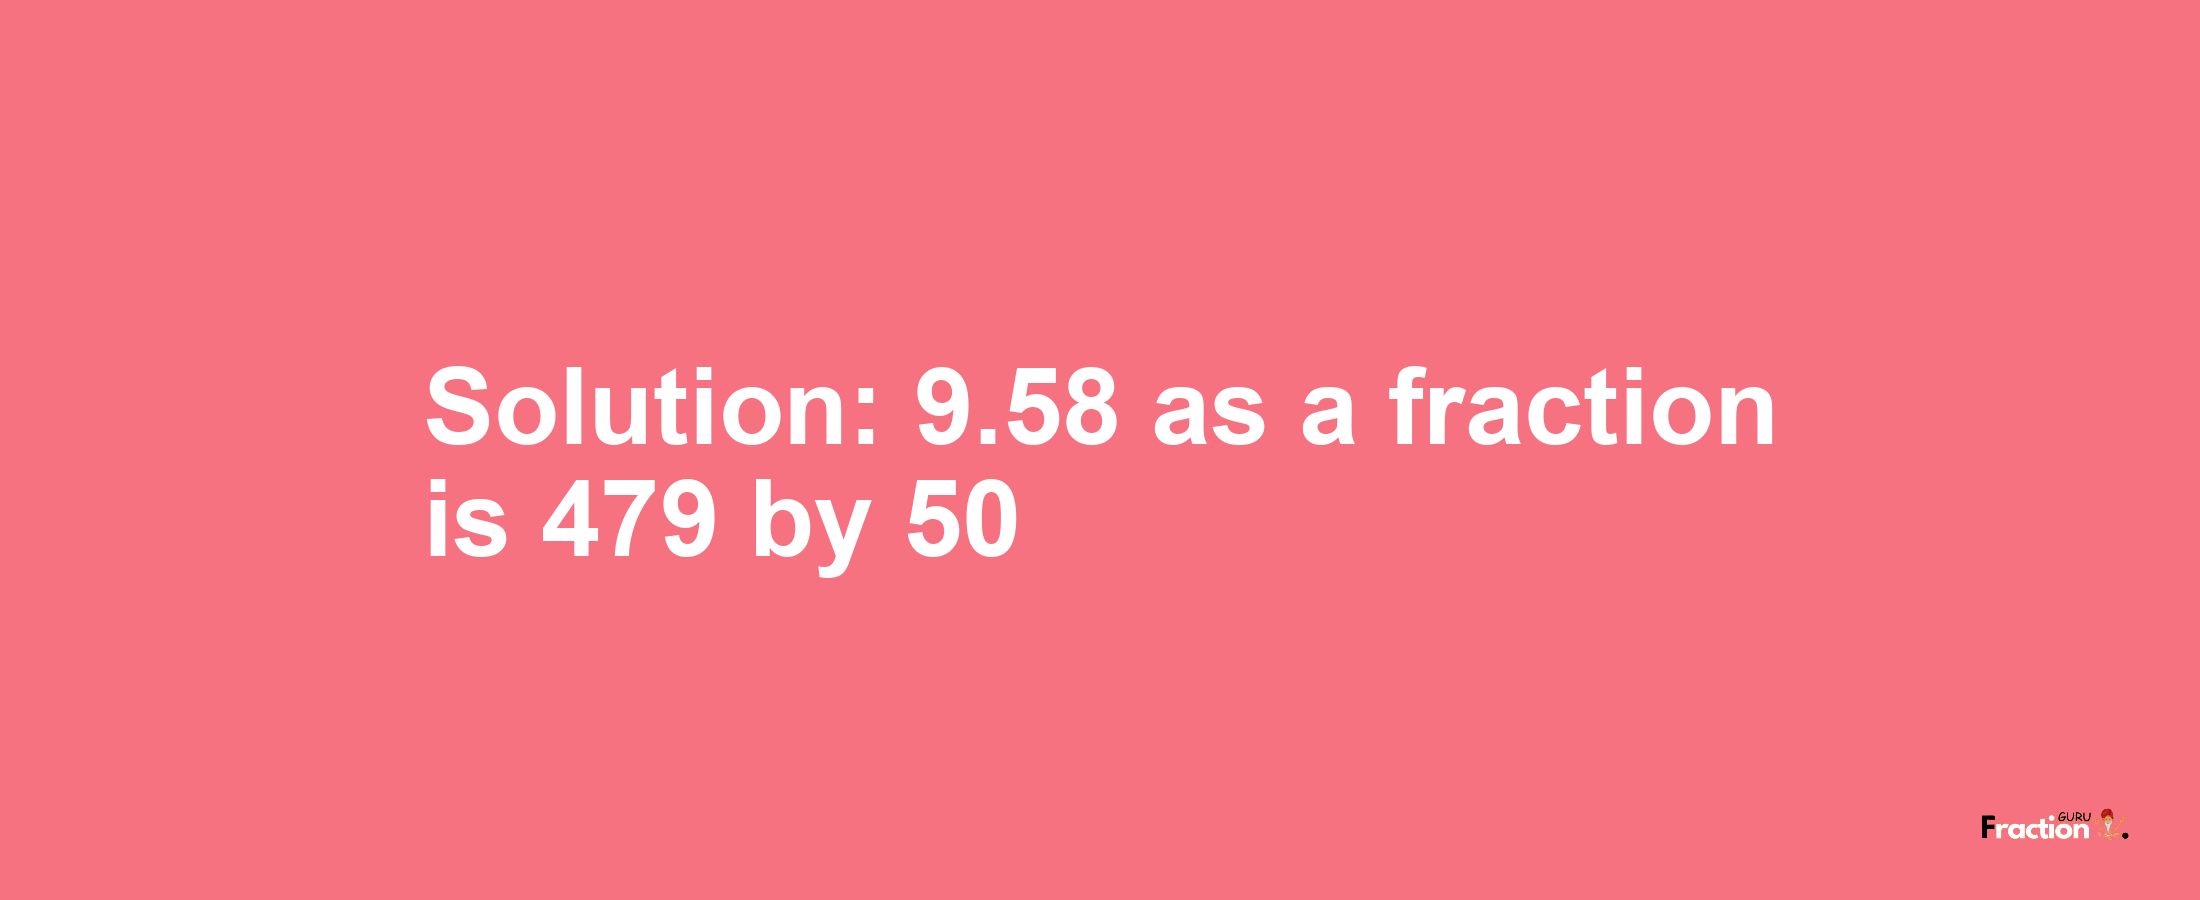 Solution:9.58 as a fraction is 479/50